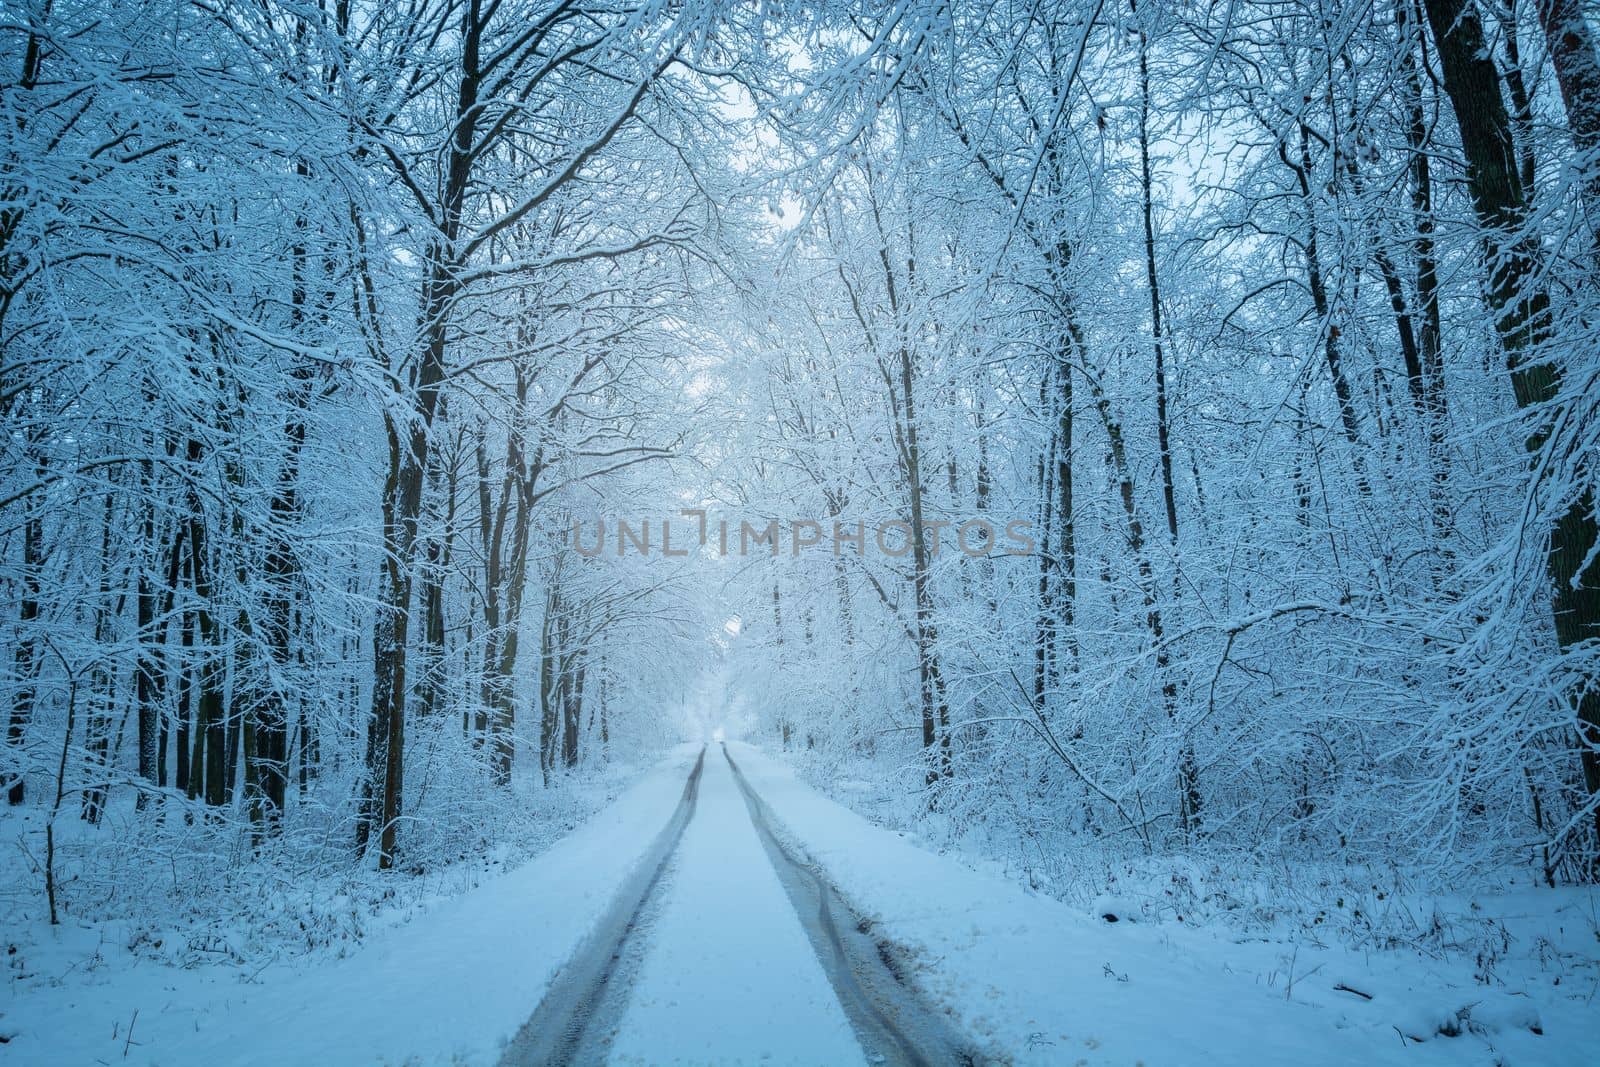 A buried straight road in a winter snowy forest by darekb22